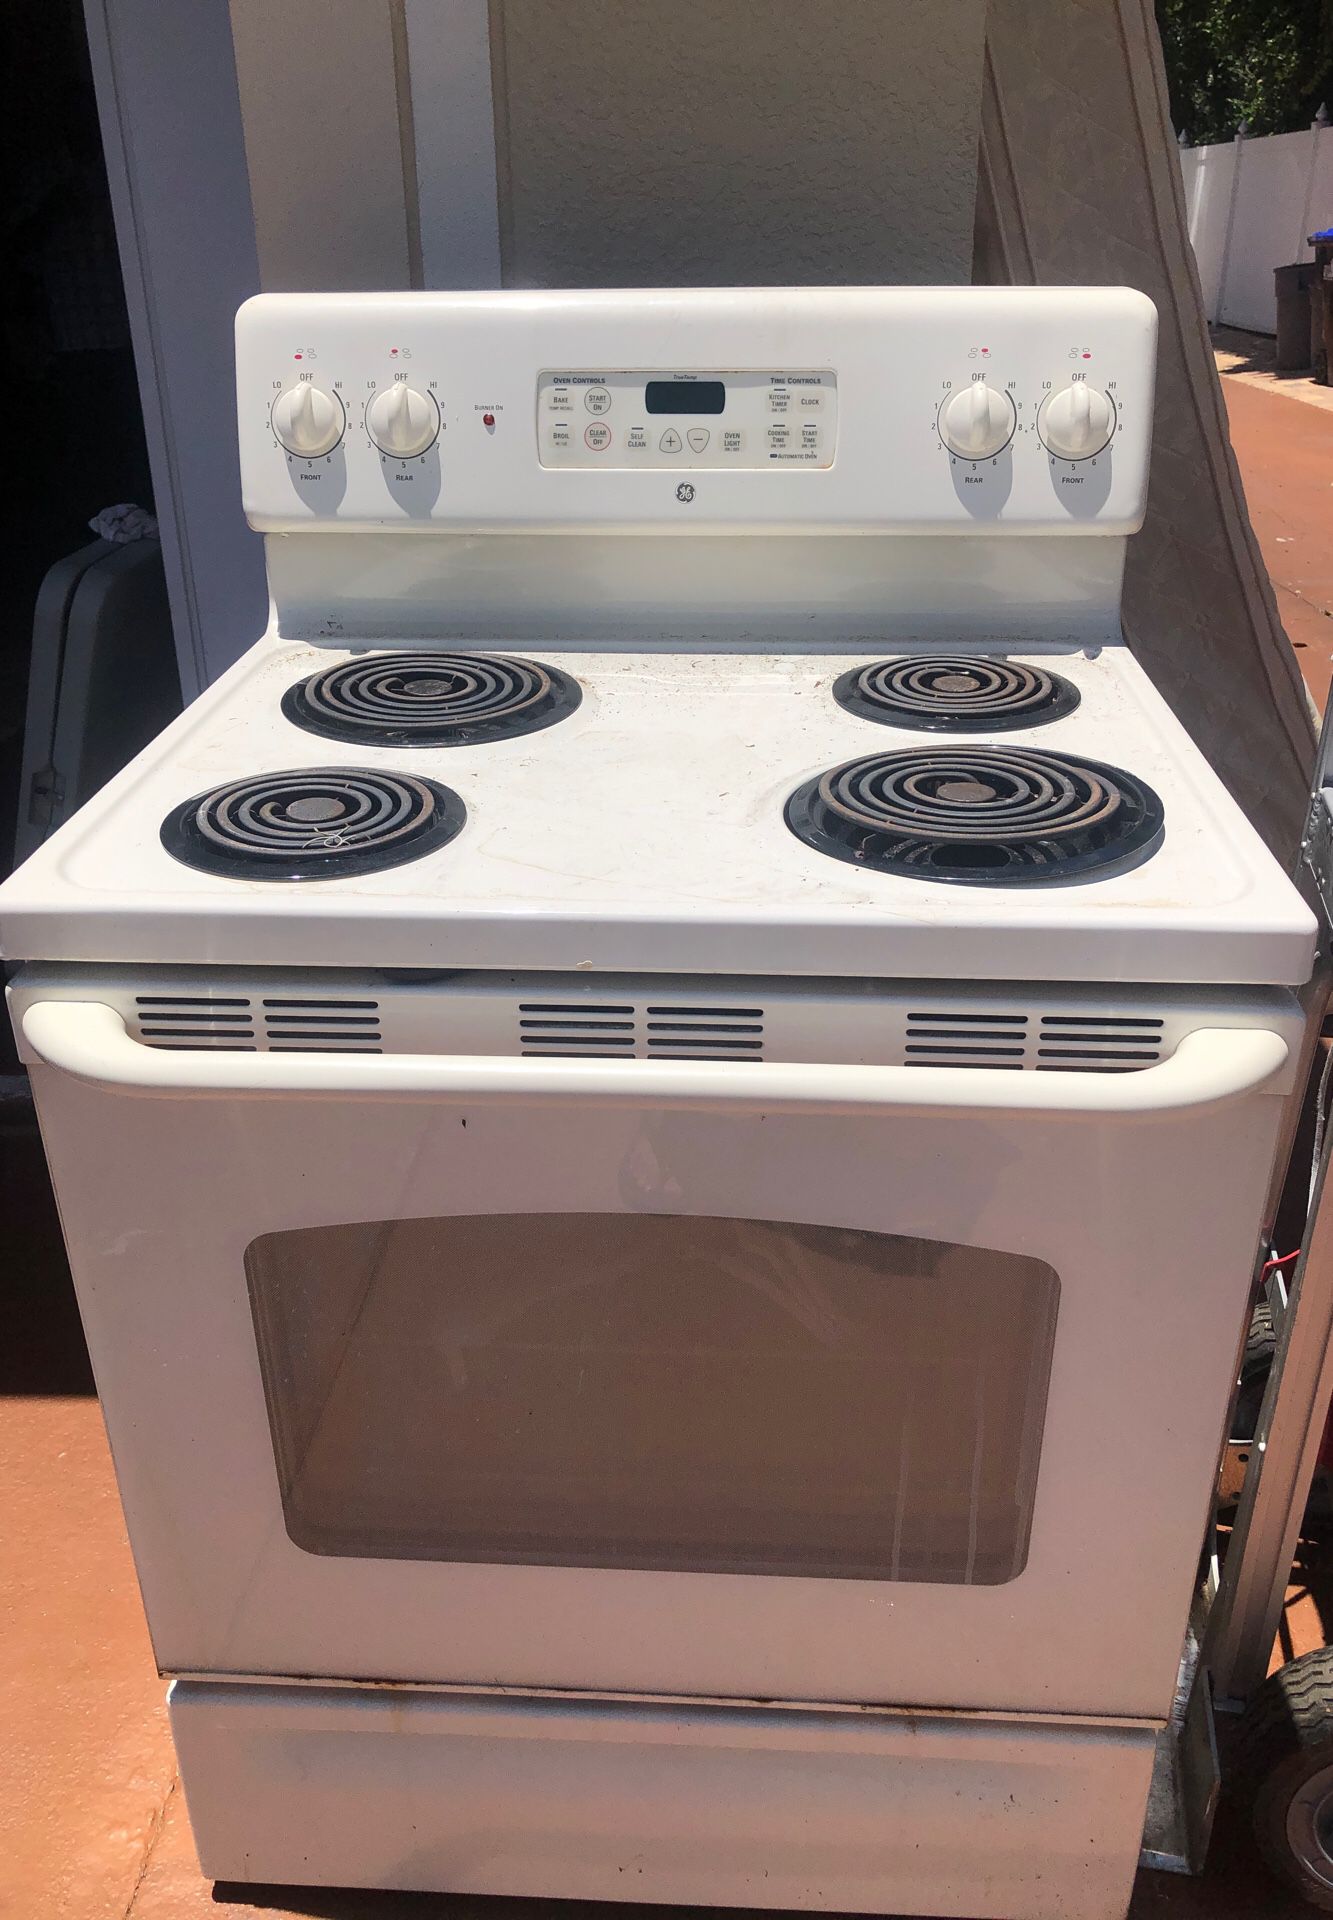 General Electric stove